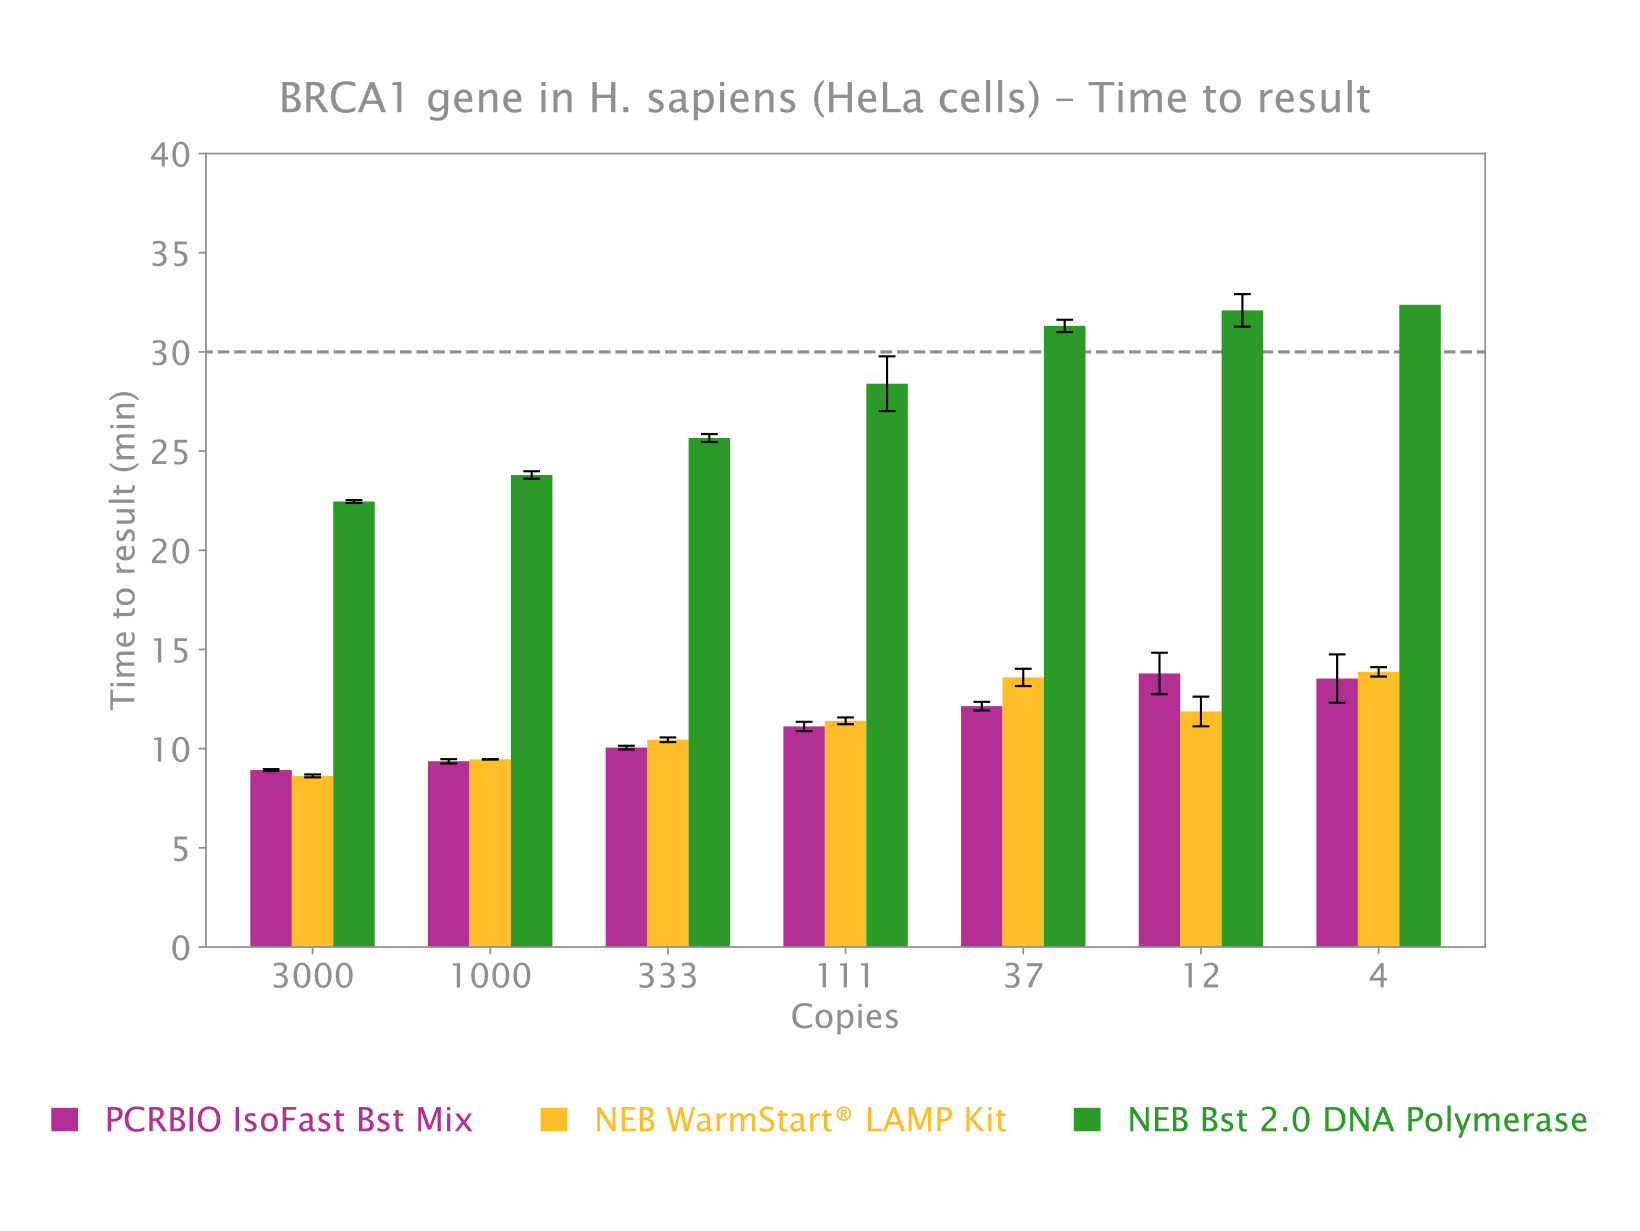 Chart showing isothermal amplification comparison (H. sapiens BRCA1 gene) between IsoFast Bst Mix and competitor products